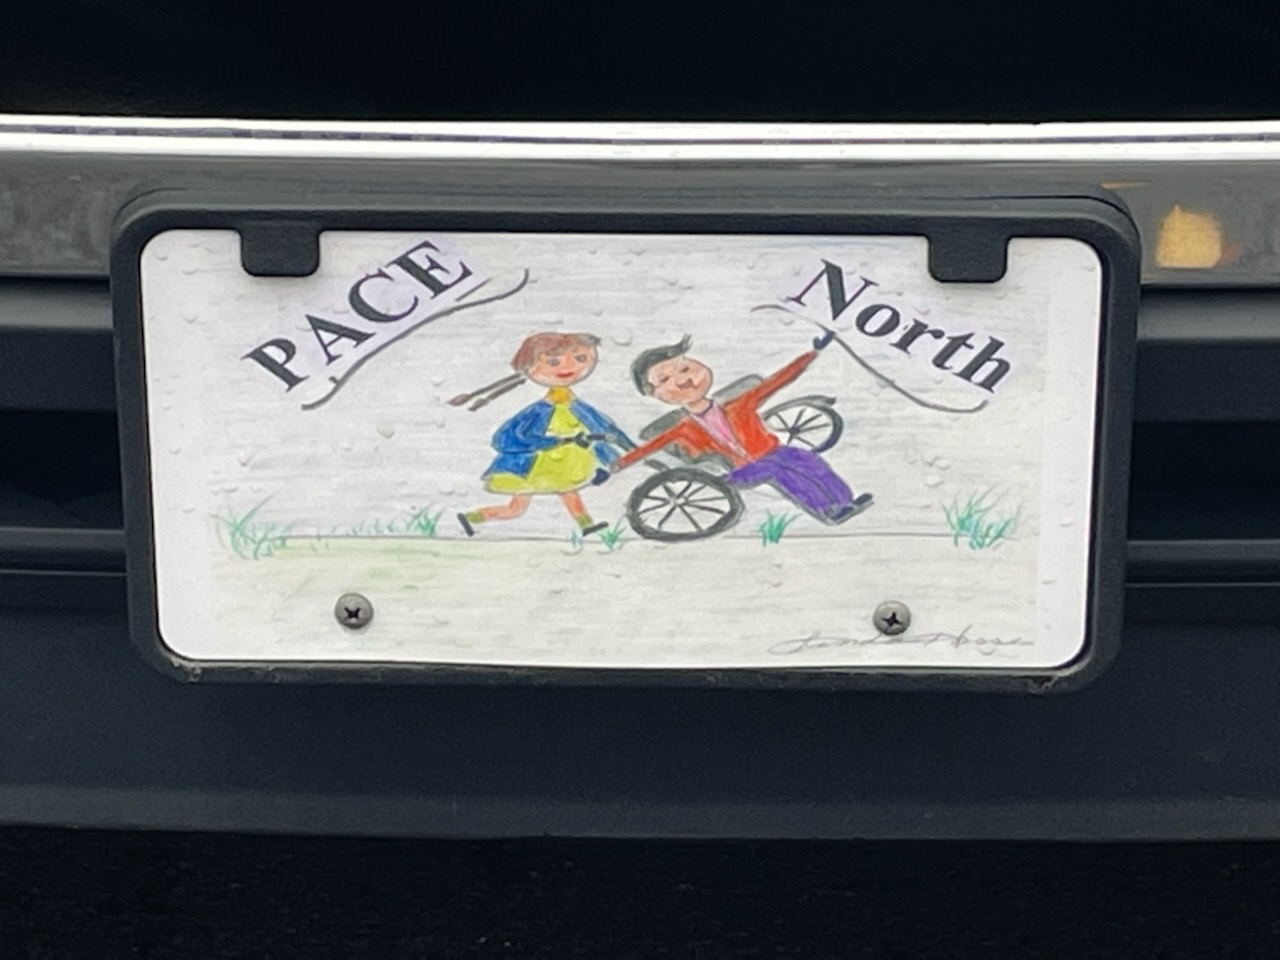 Pace North Artwork